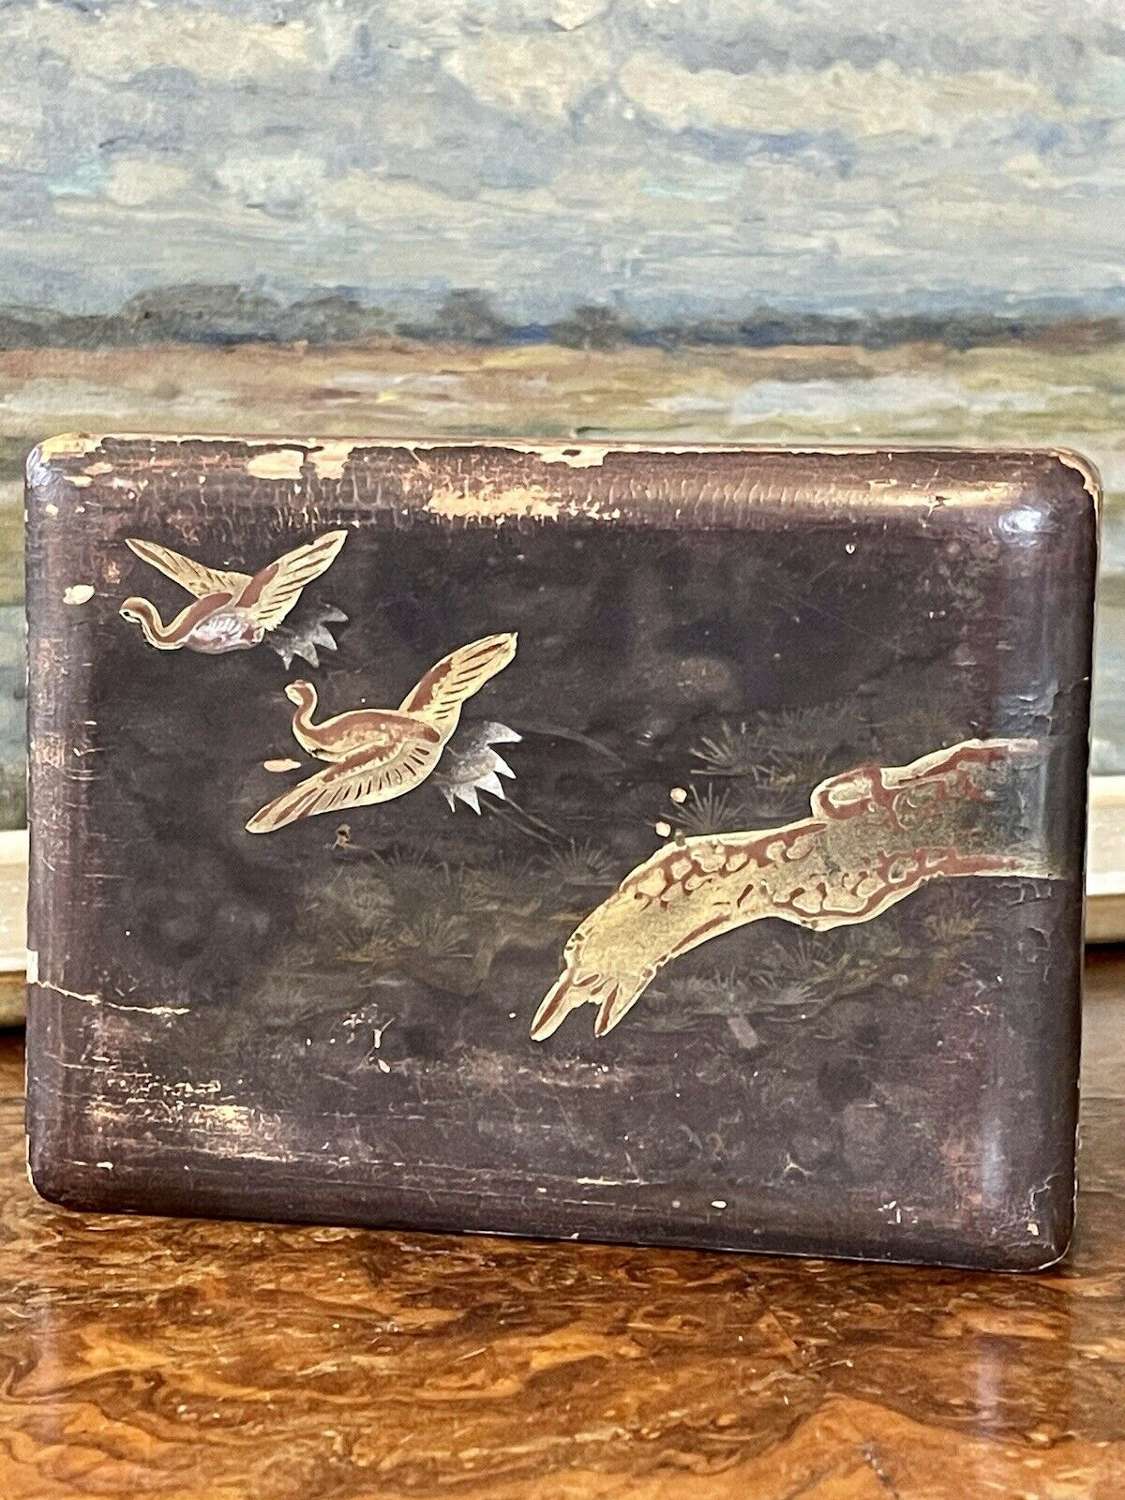 Antique chinoiserie Chinese Japanese lacquer box.